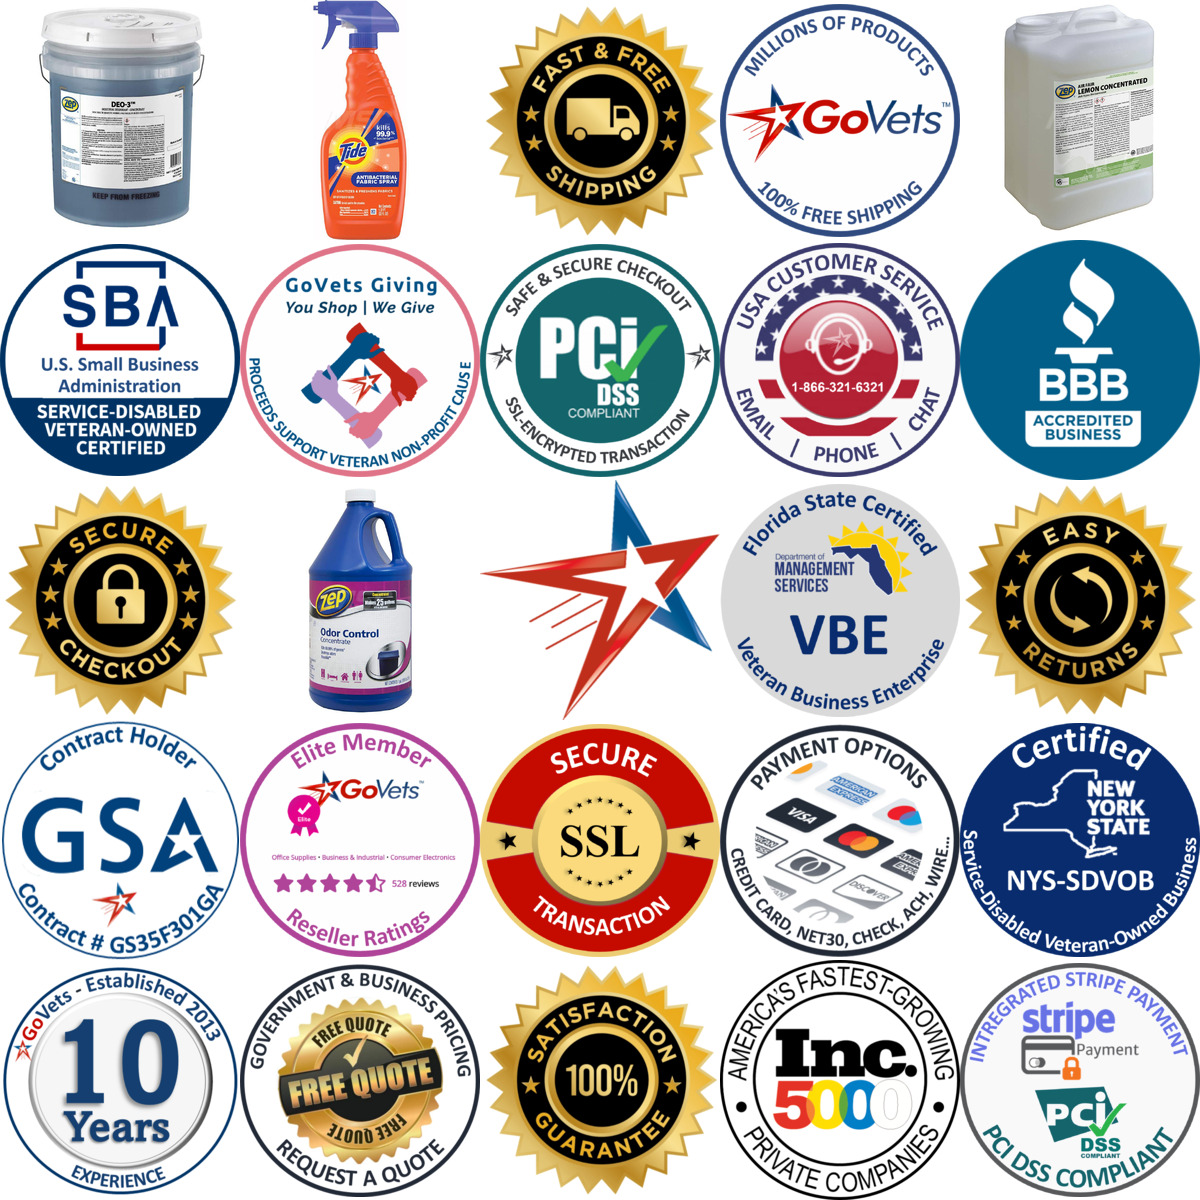 A selection of Detergents products on GoVets